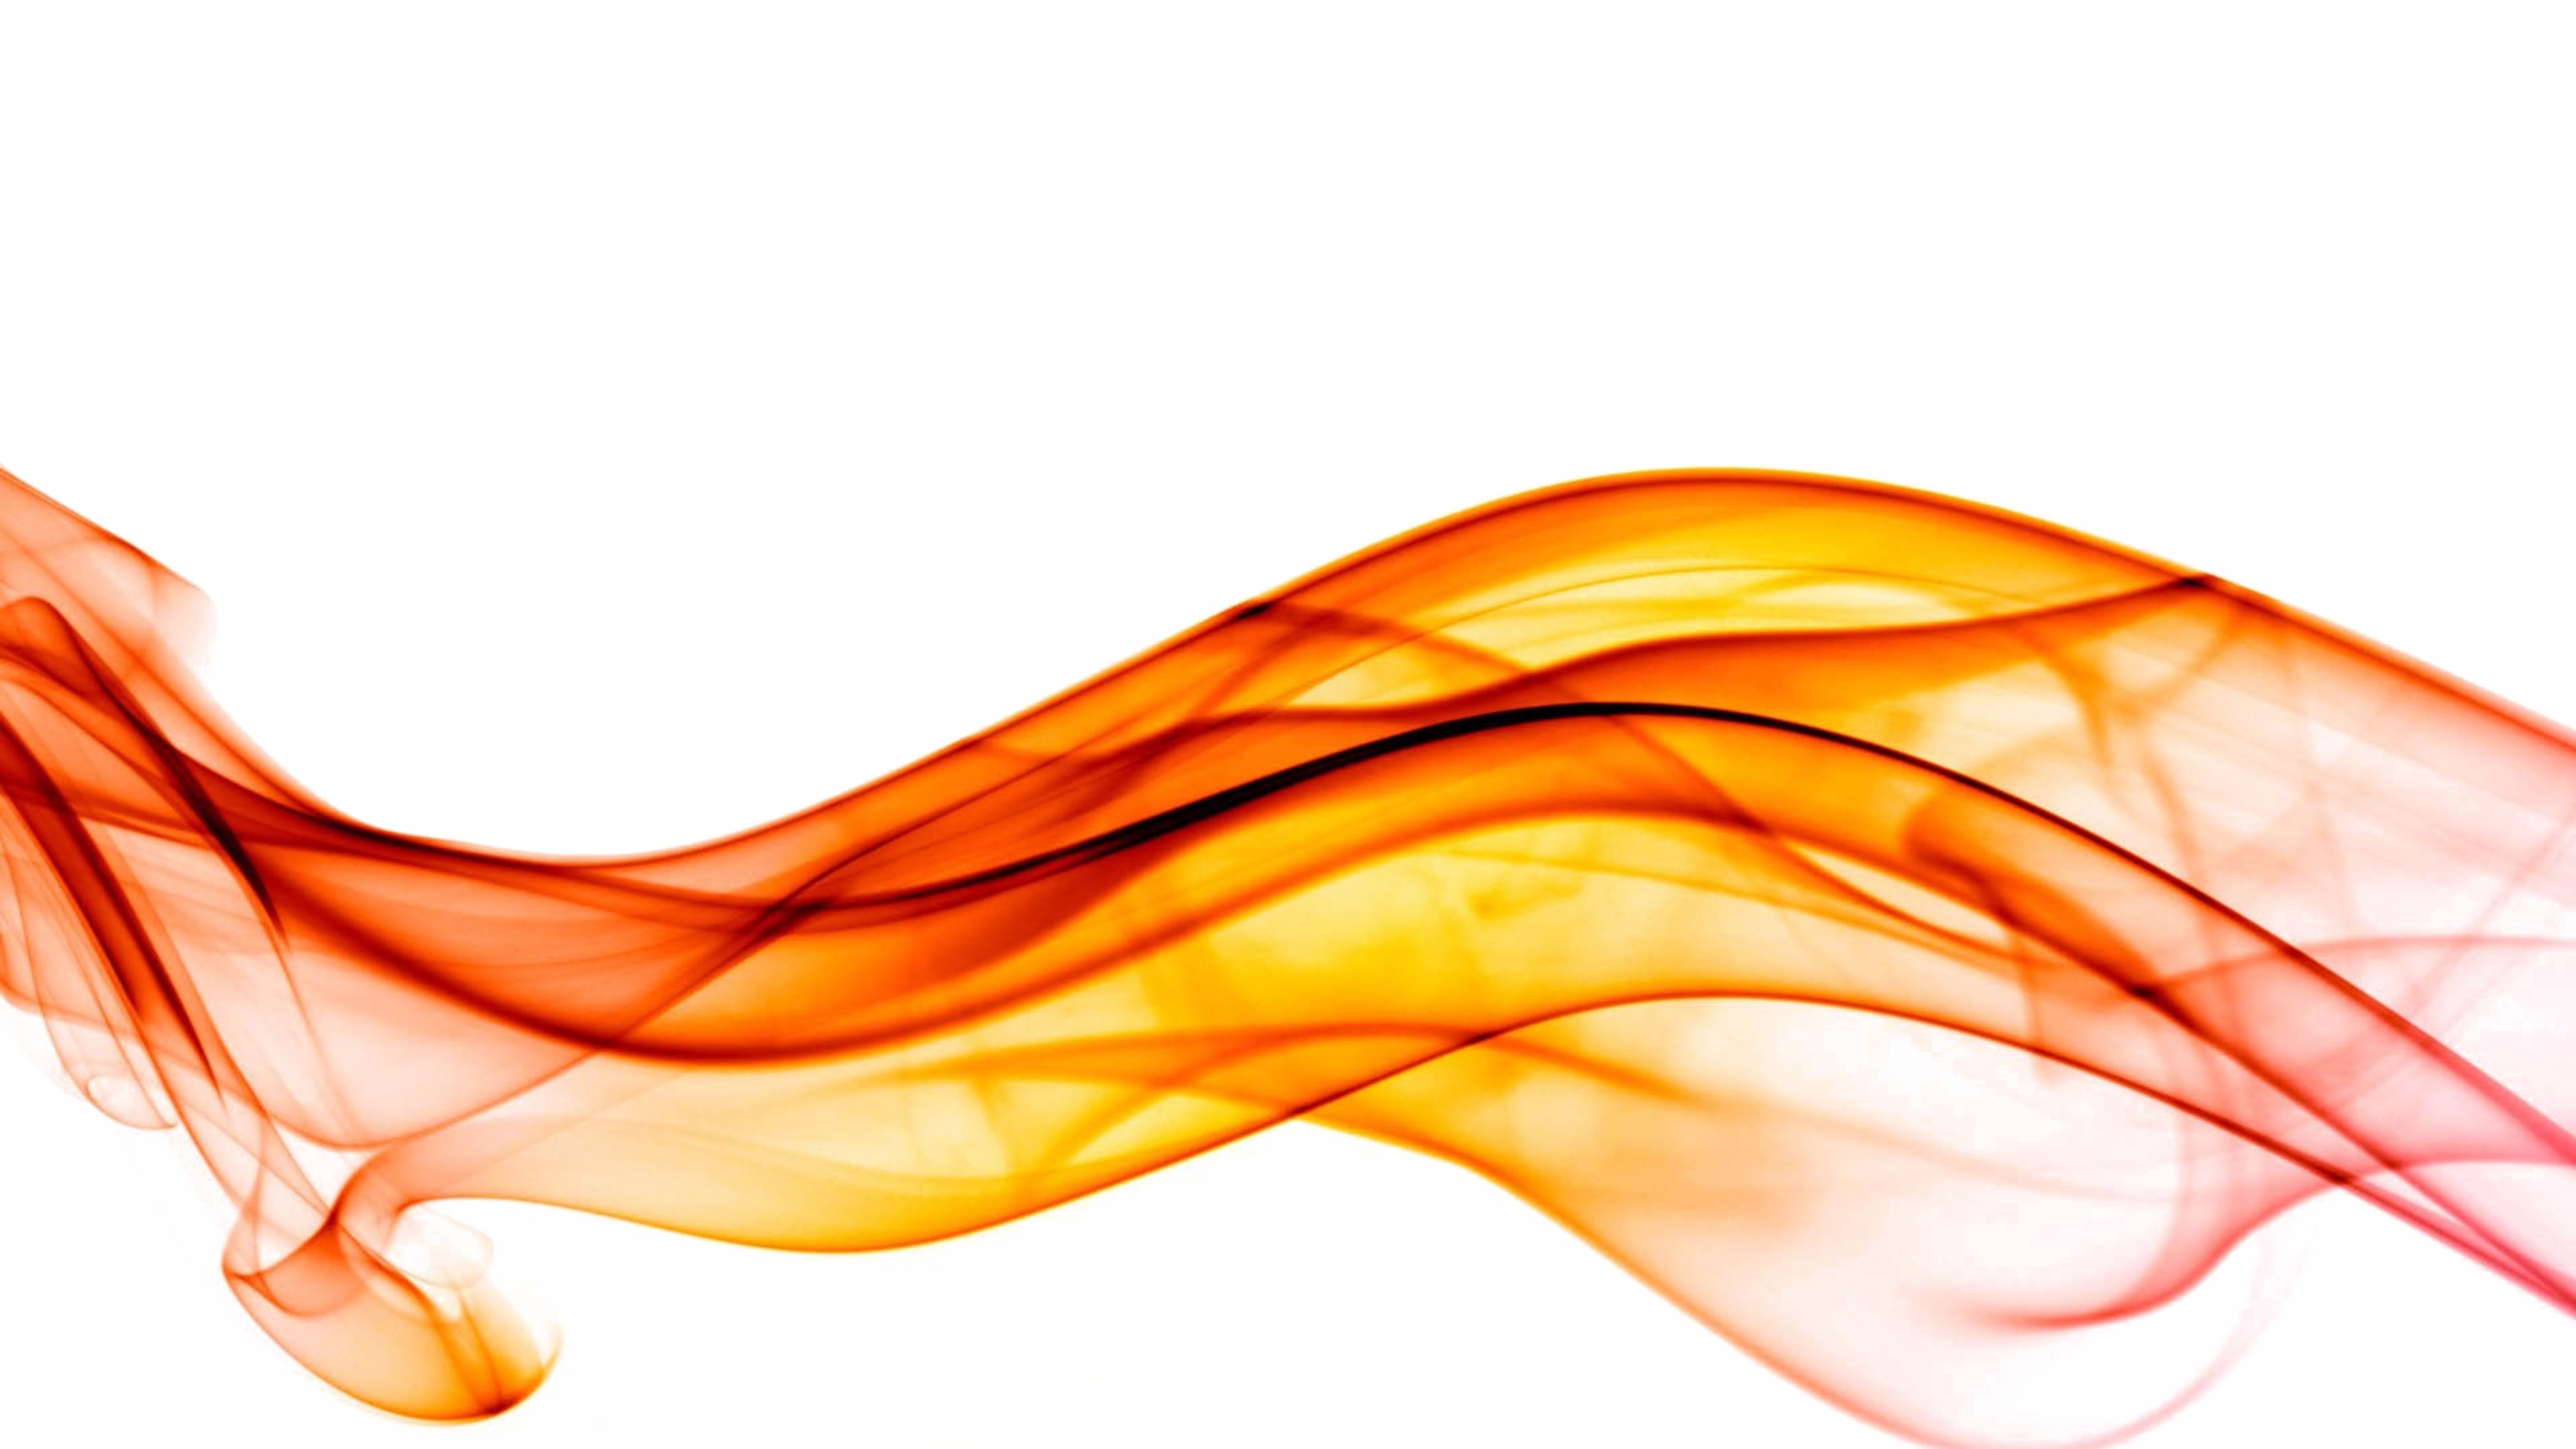 Abstract Wave Images Free HD Image PNG Image